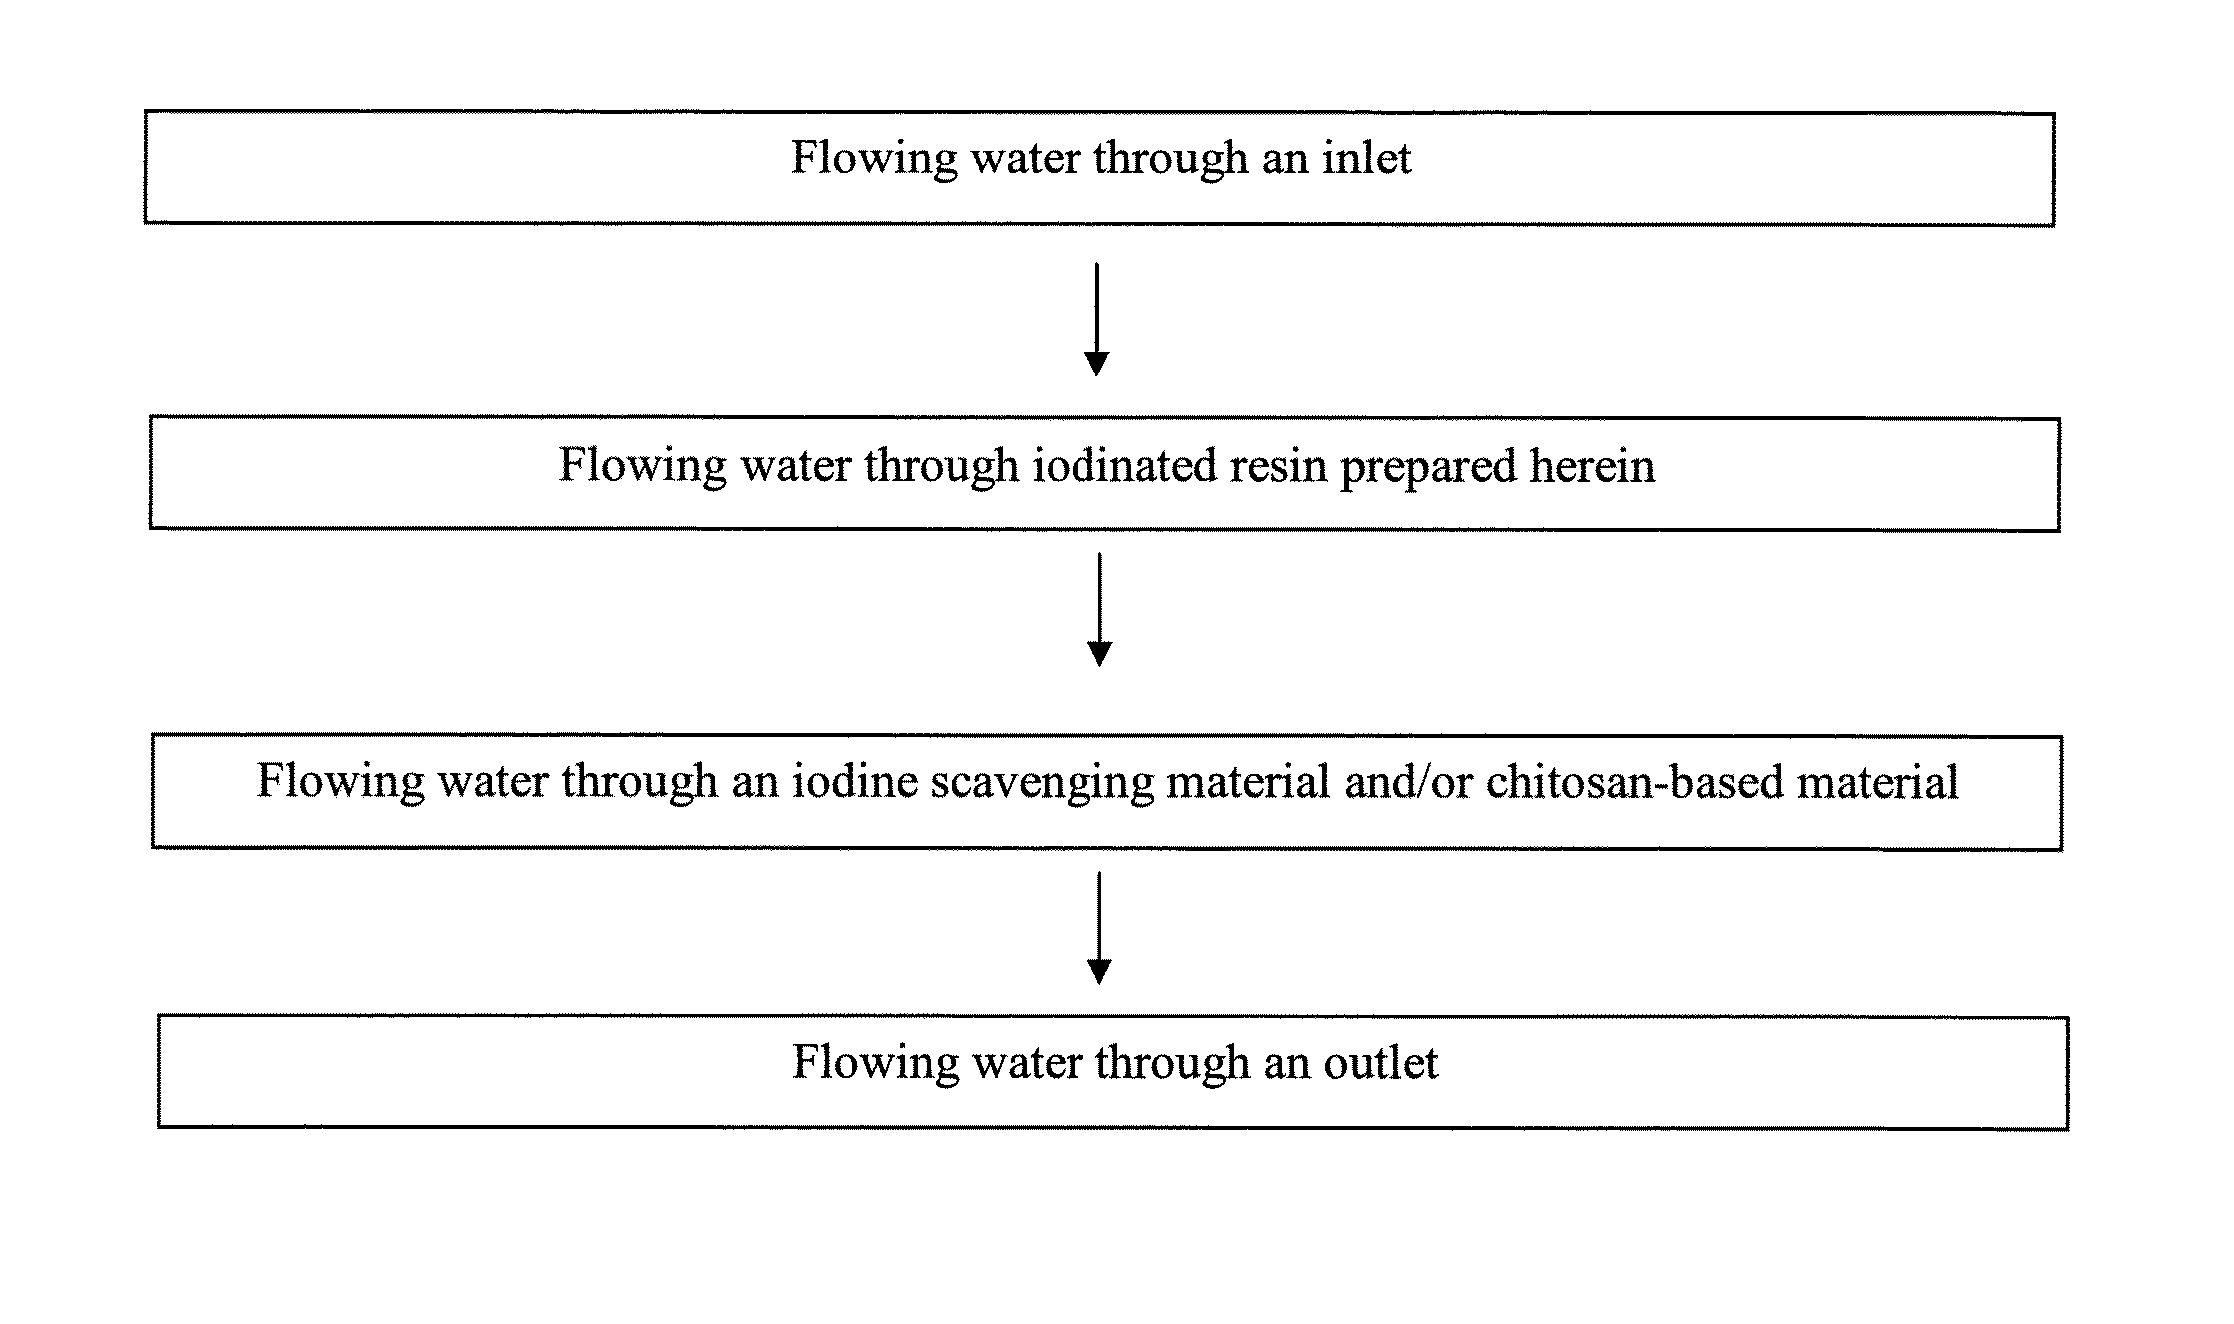 Methods of producing iodinated resins